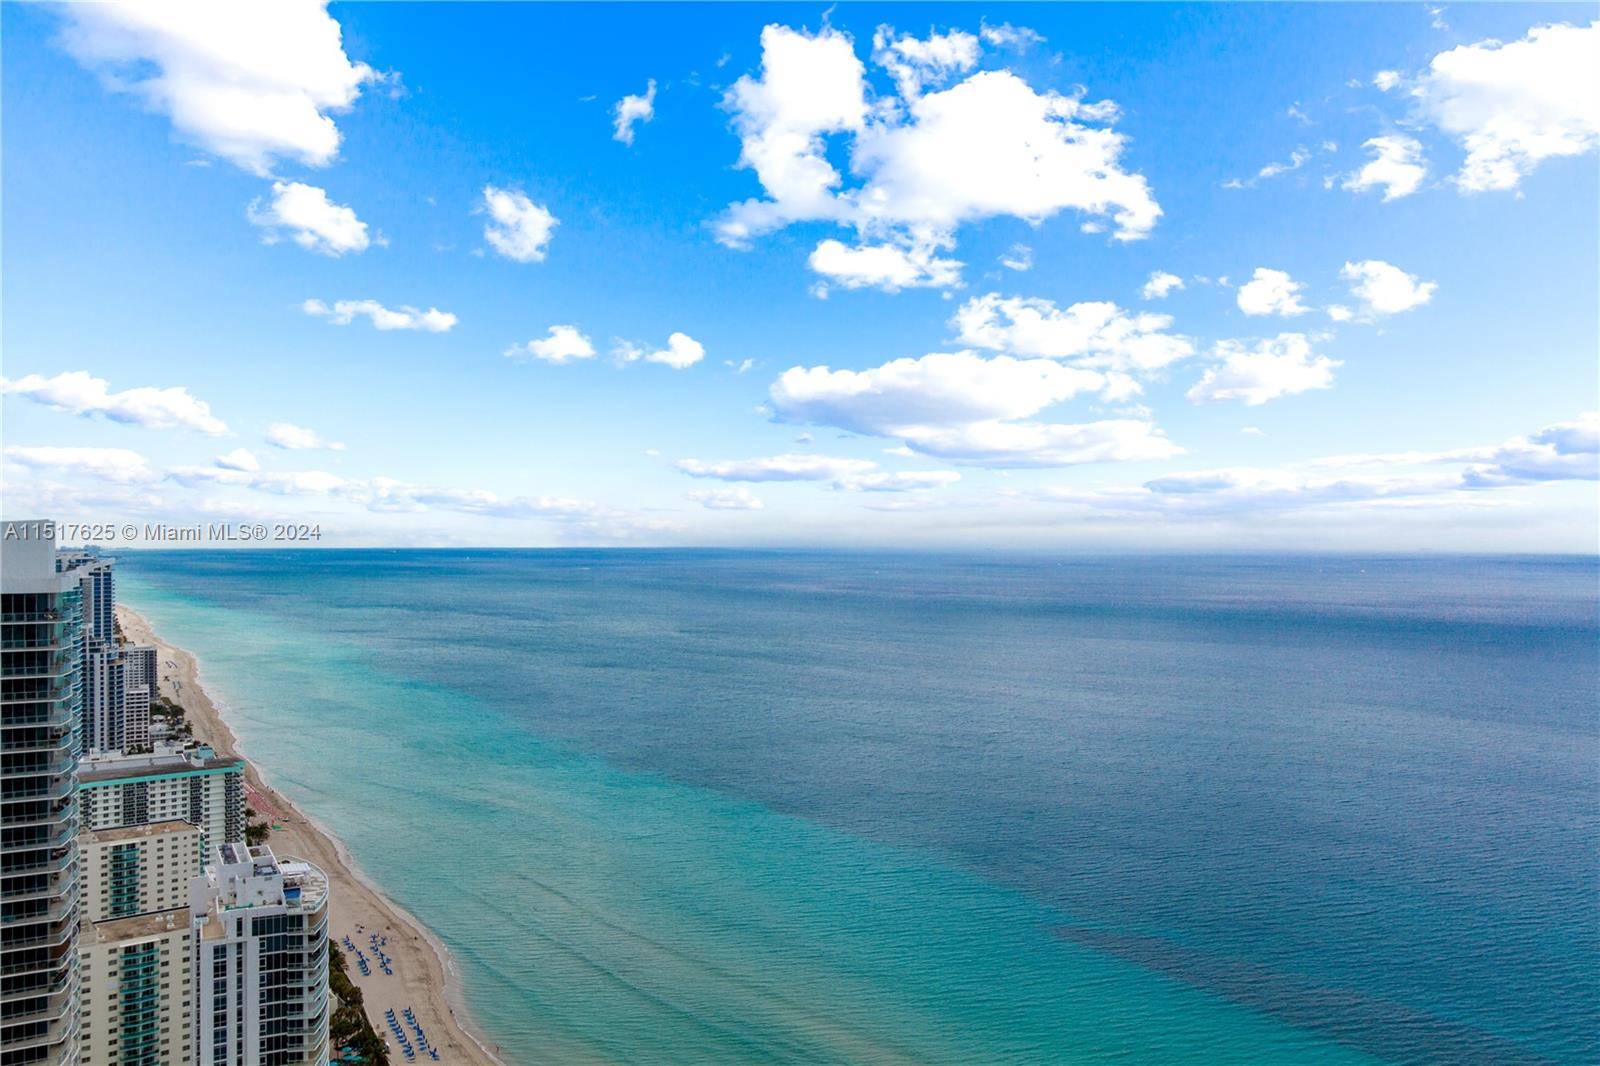 Experience breathtaking ocean views from this two bedroom lower penthouse with 1, 337 sq.